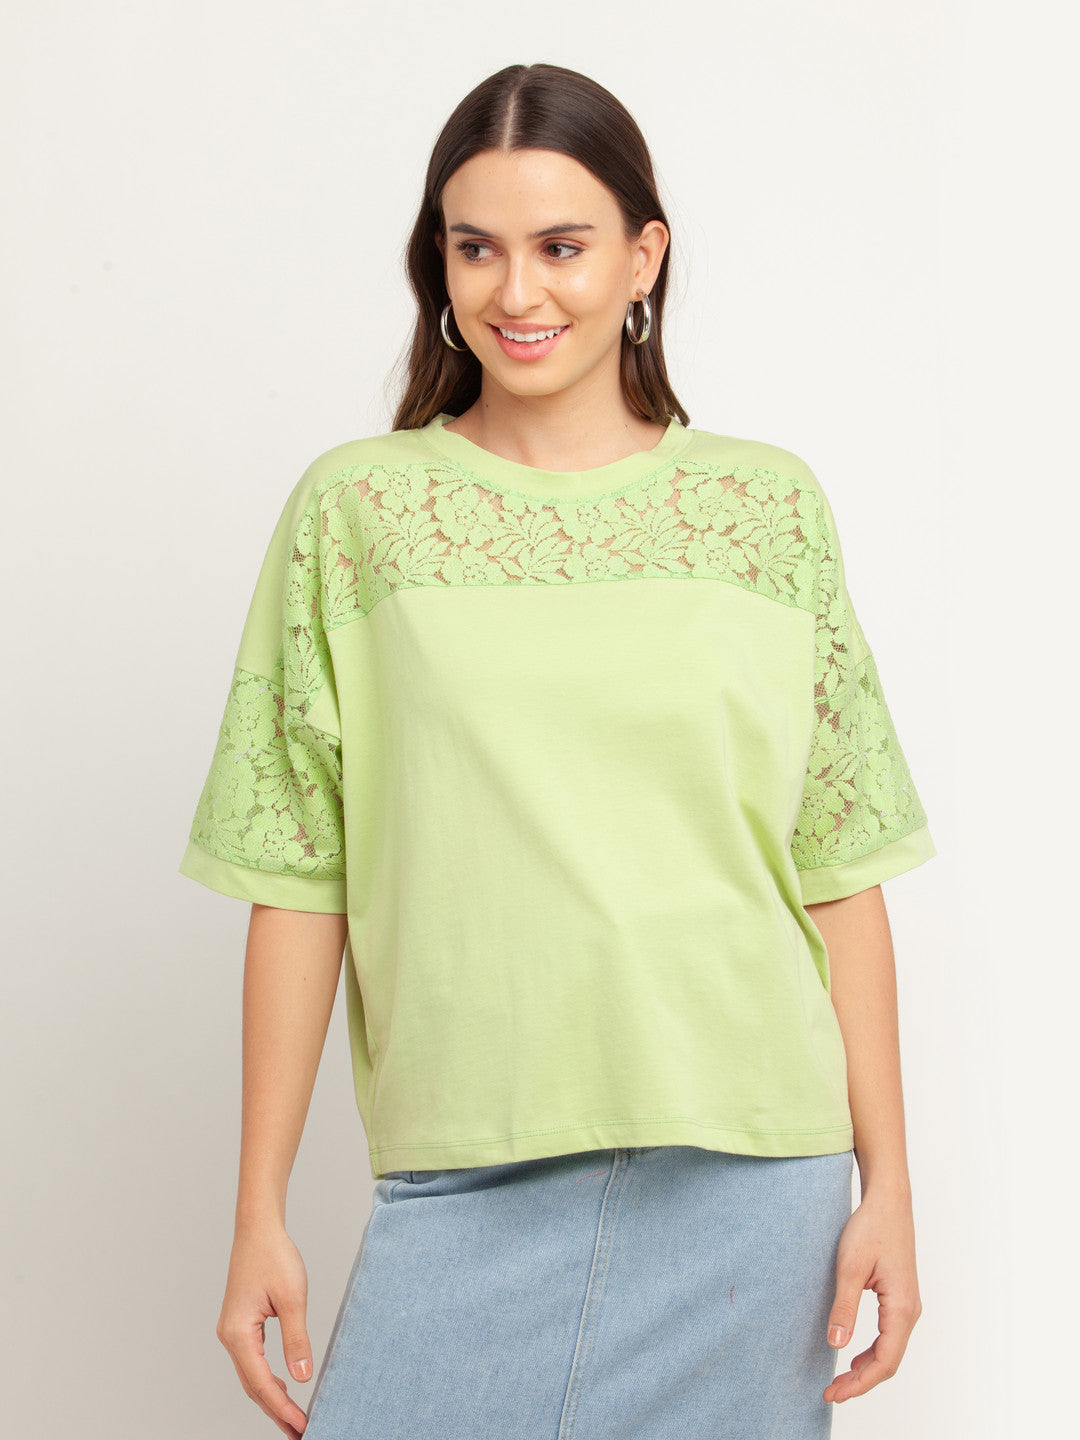 Green Solid Short Sleeves Top For Women